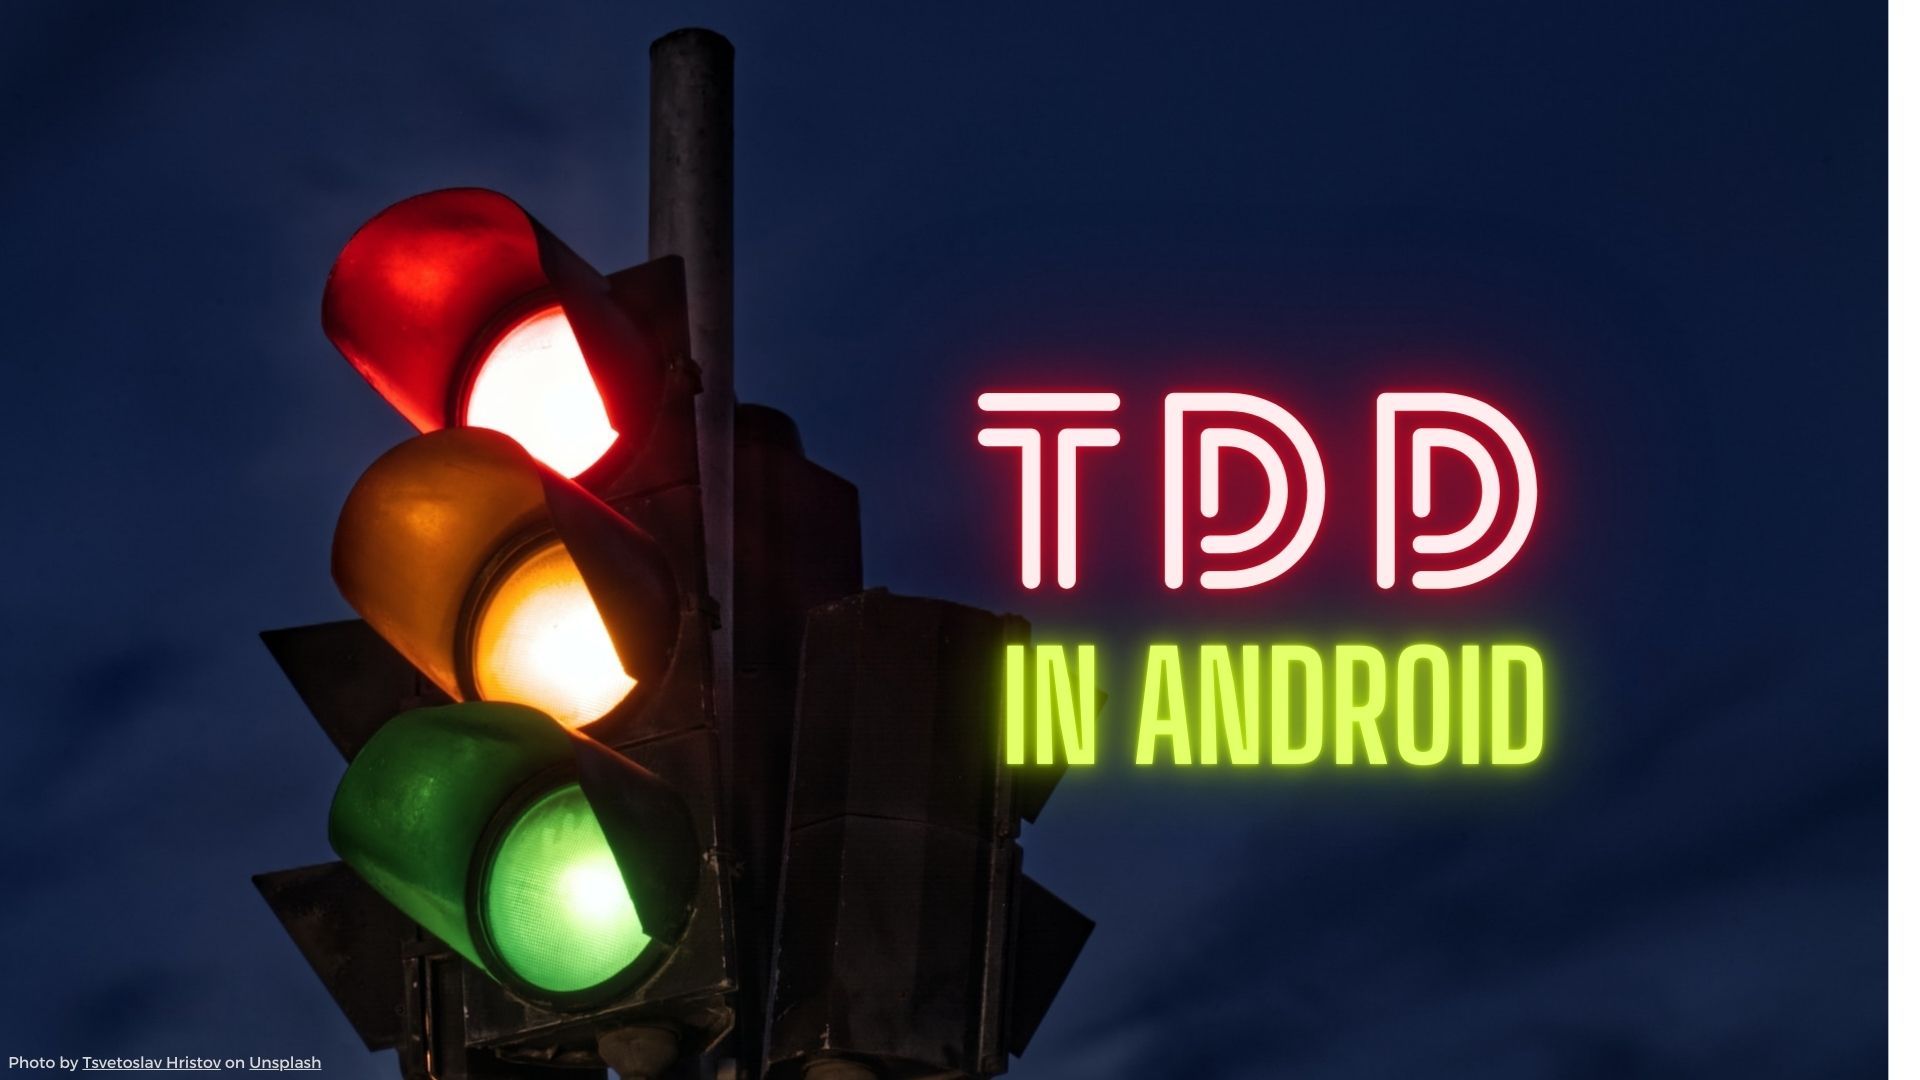 Test Driven Development in Android Apps – A Practical Guide to TDD